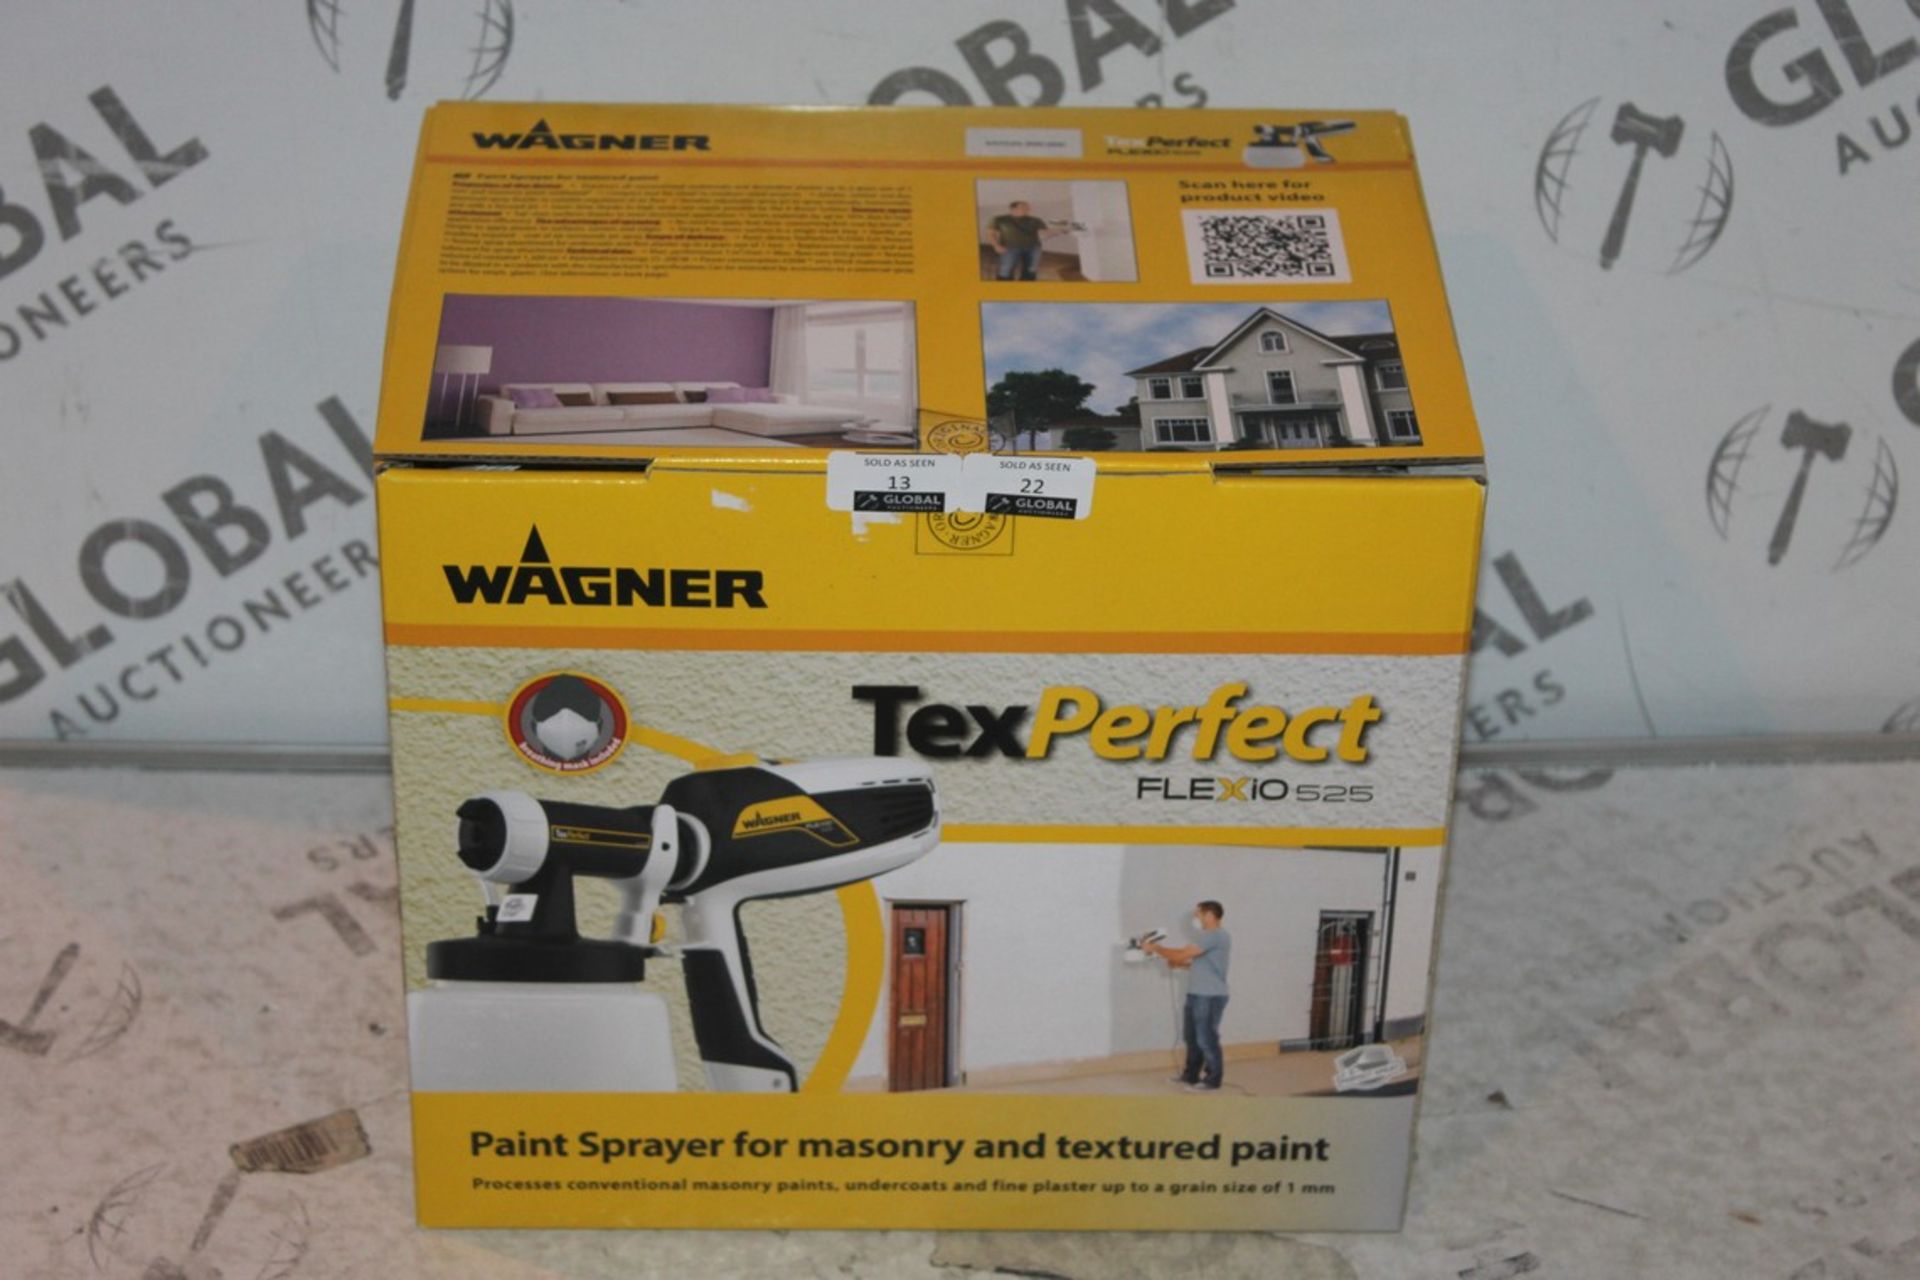 Boxed Brand New Wagner Tex Perfect Flex 525 Masonary and Textured Paint Sprayer RRP £55